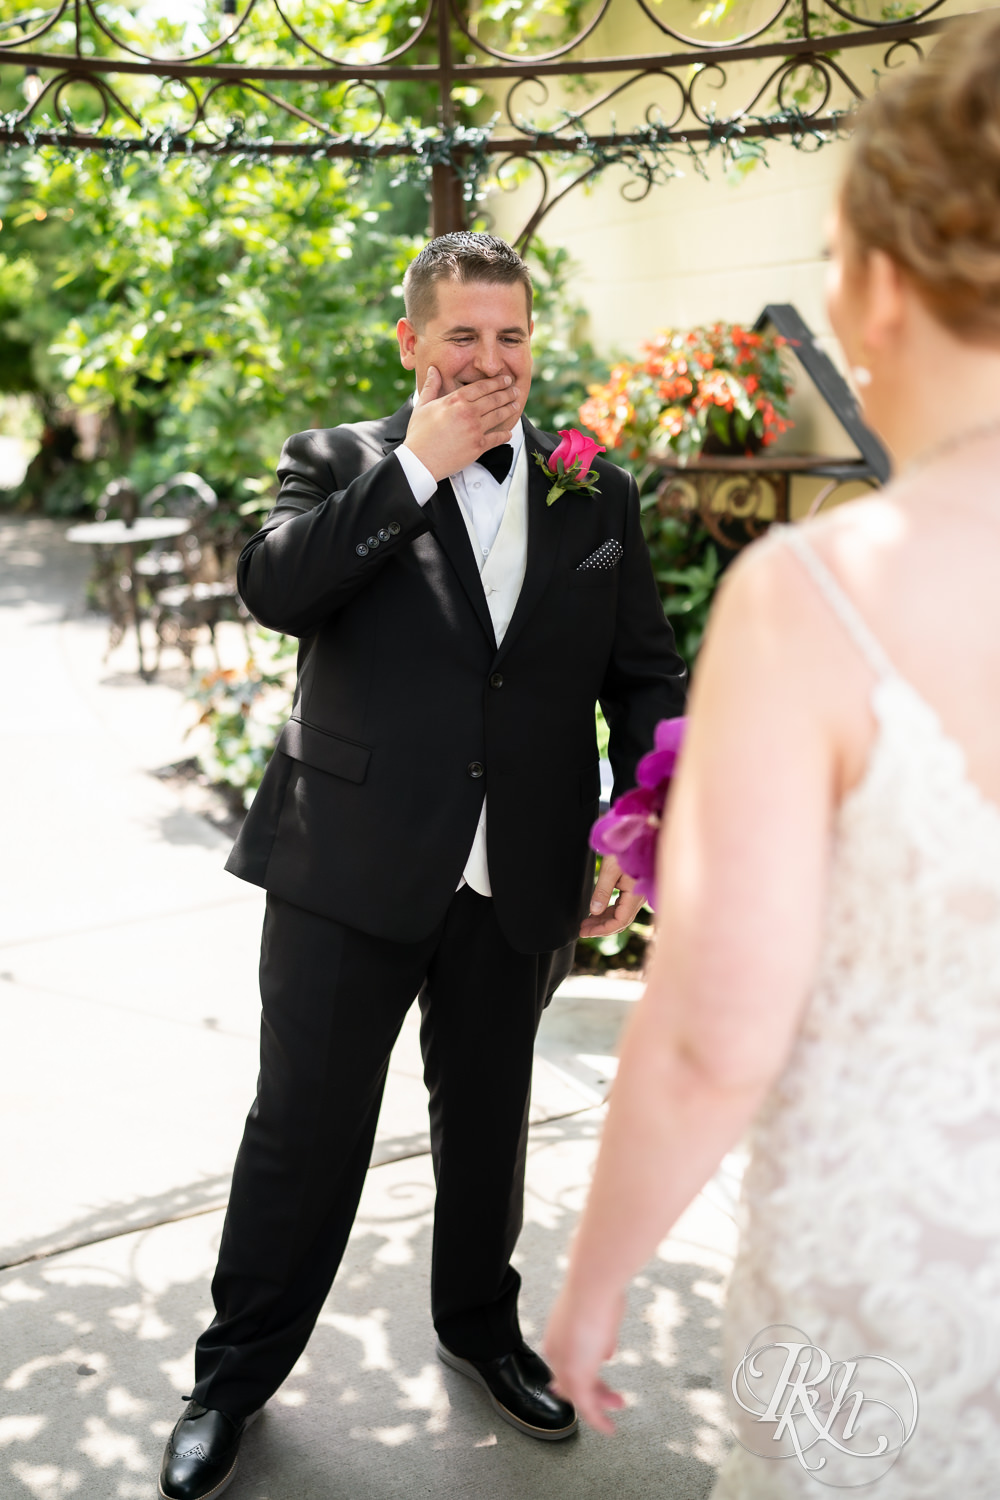 First look during June wedding at Kellerman's Event Center in White Bear Lake, Minnesota.